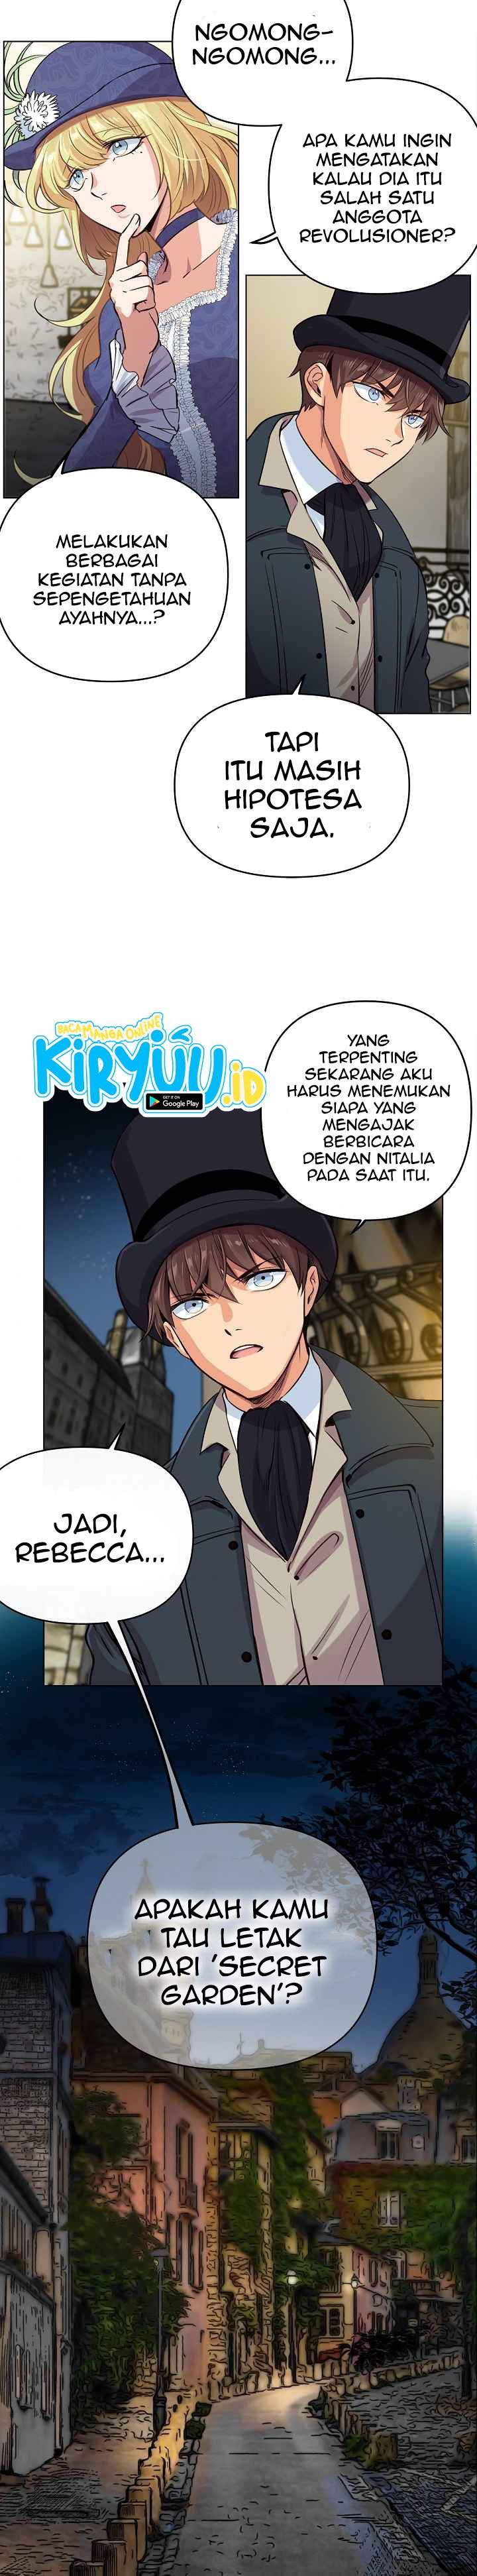 Time Roulette Chapter 09